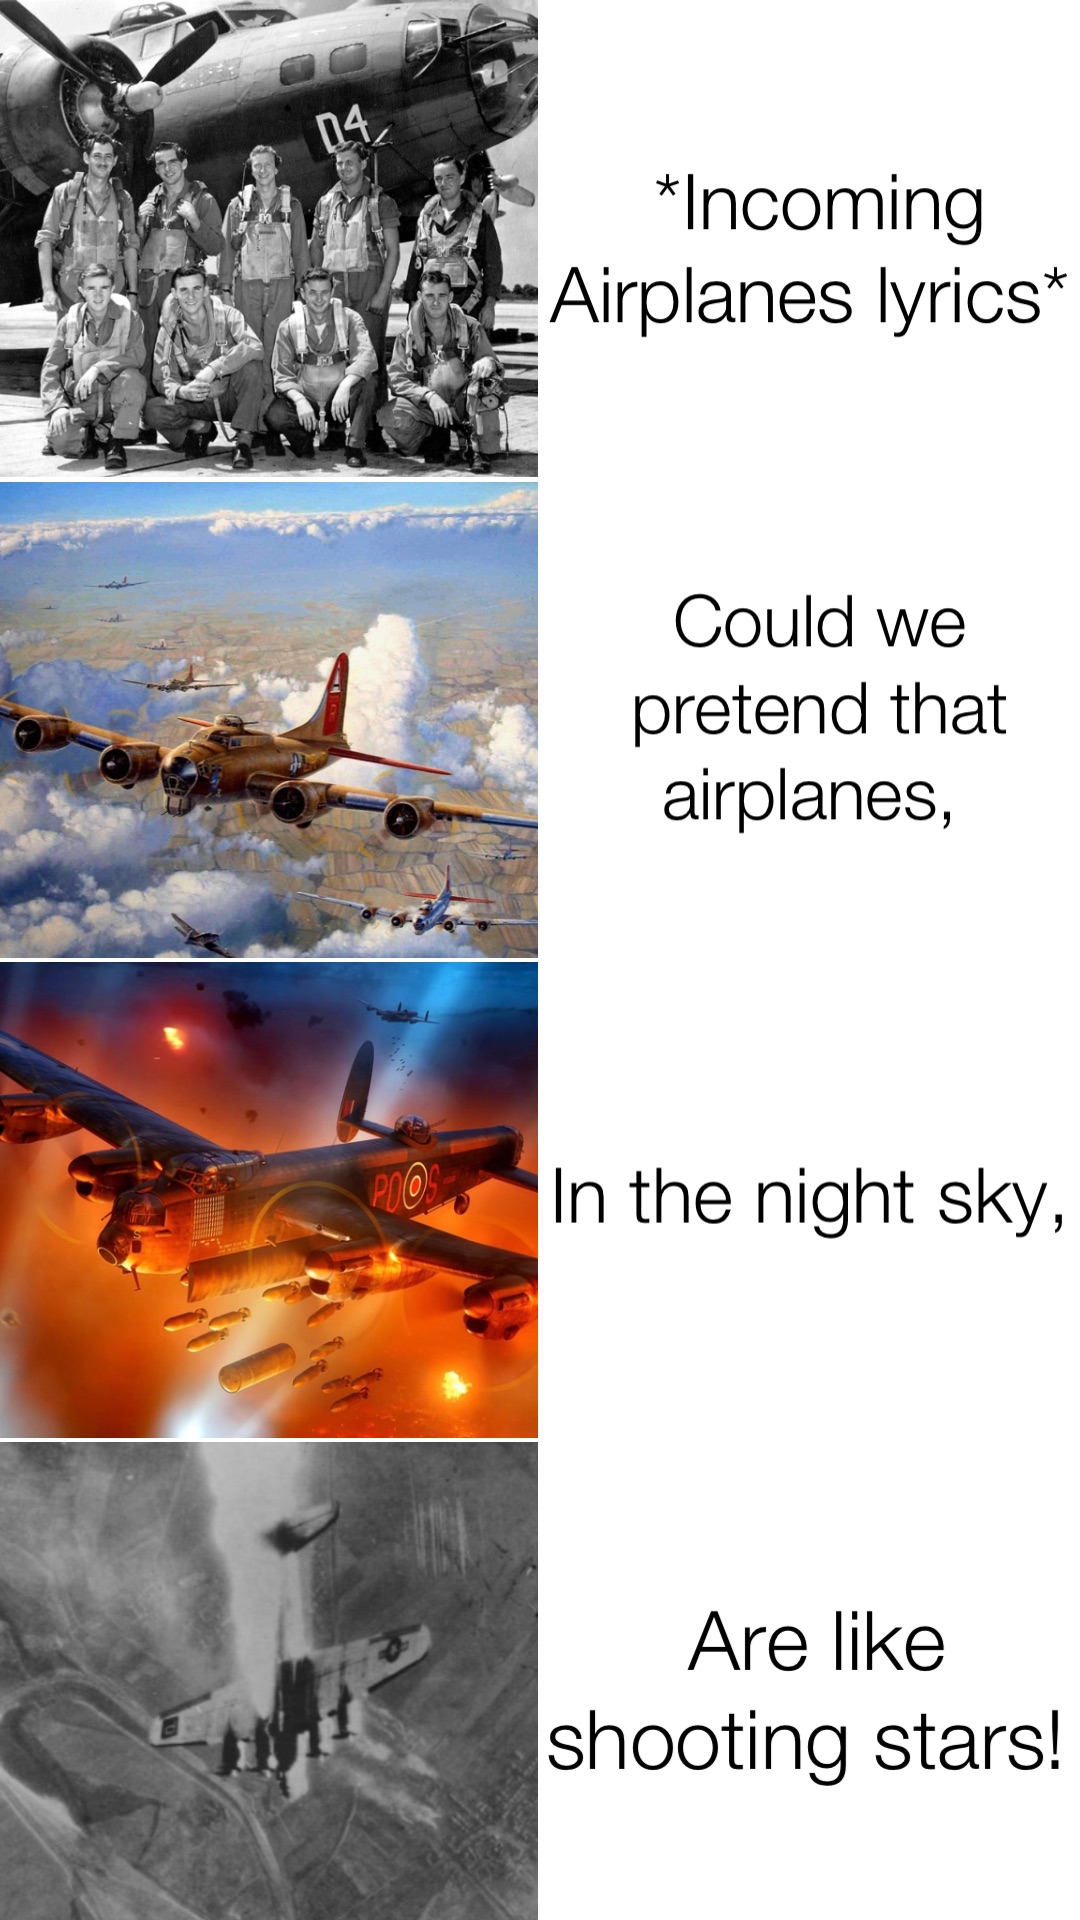 *Incoming Airplanes lyrics* Could we pretend that airplanes, In the night sky, Are like shooting stars!